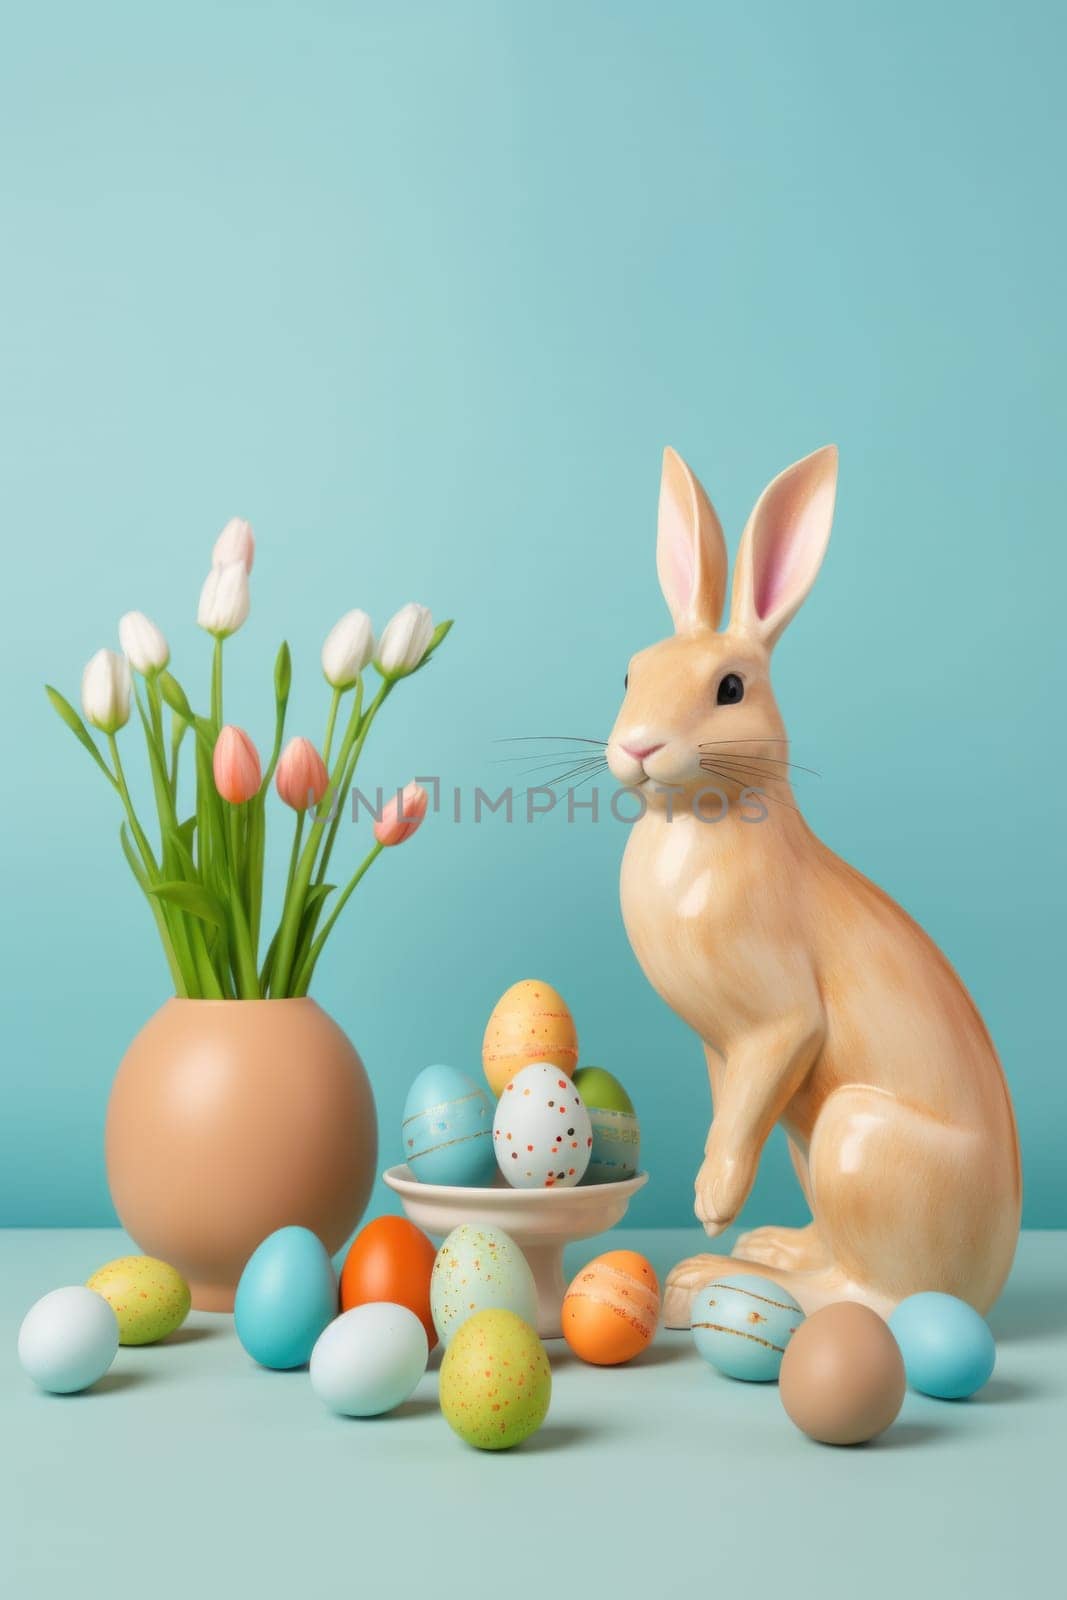 A bunny figurine sitting next to a vase filled with easter eggs, AI by starush